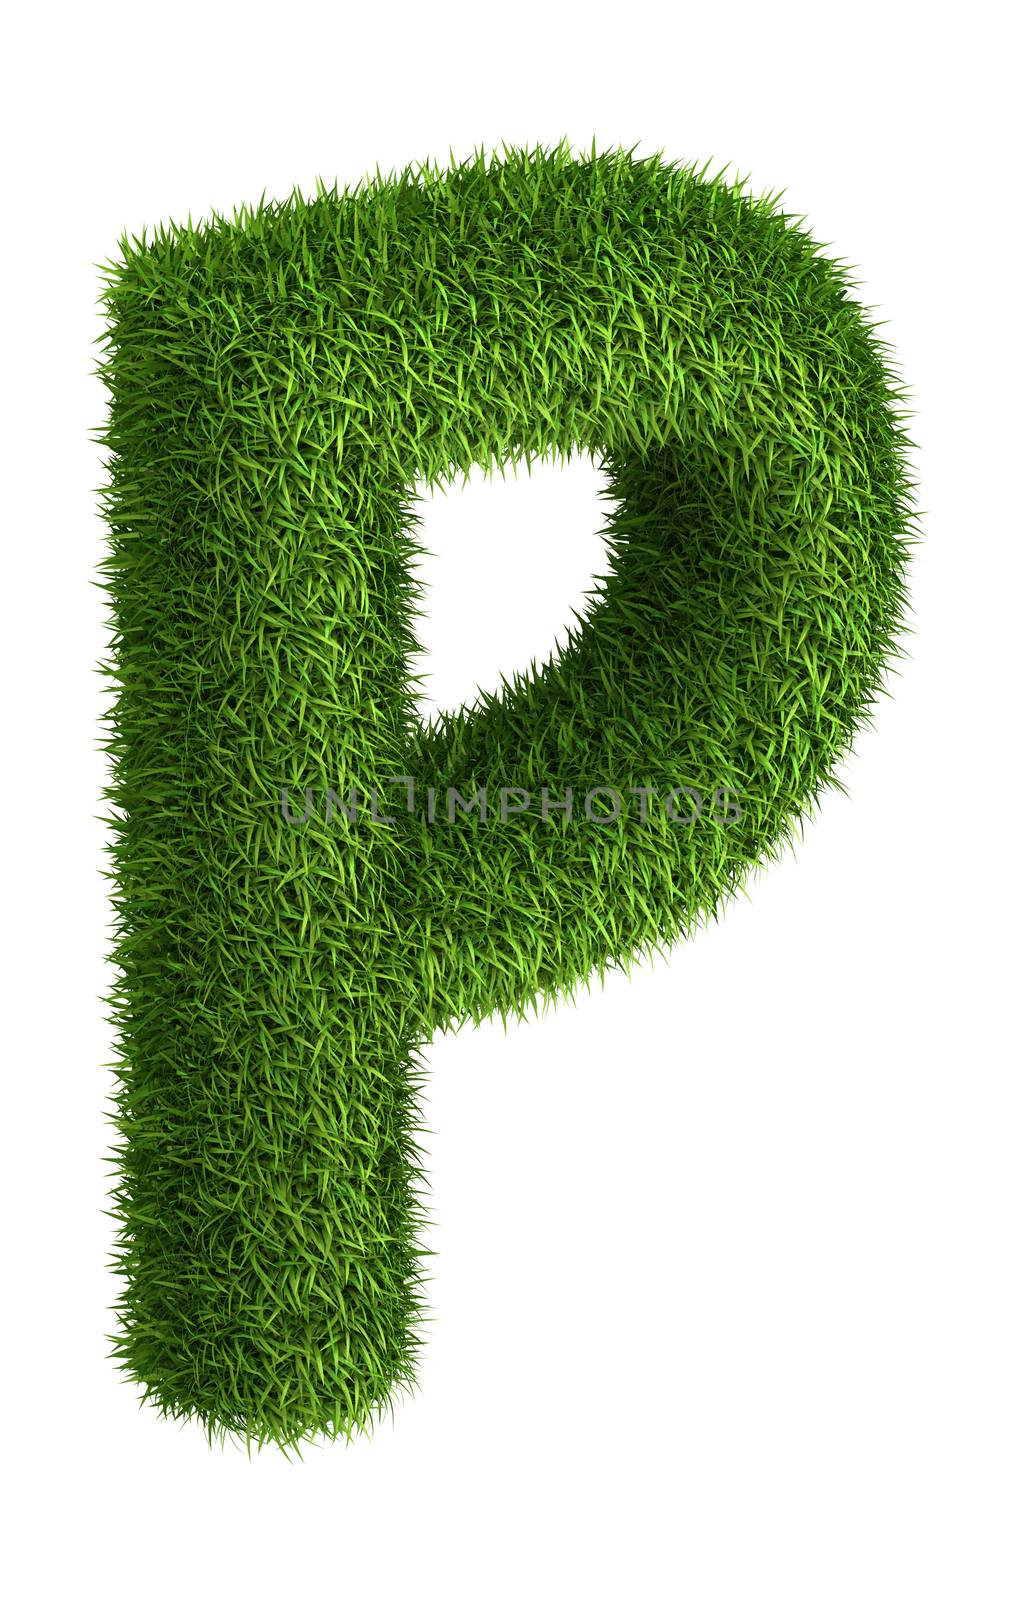 3D Letter P photo realistic isometric projection grass ecology theme on white